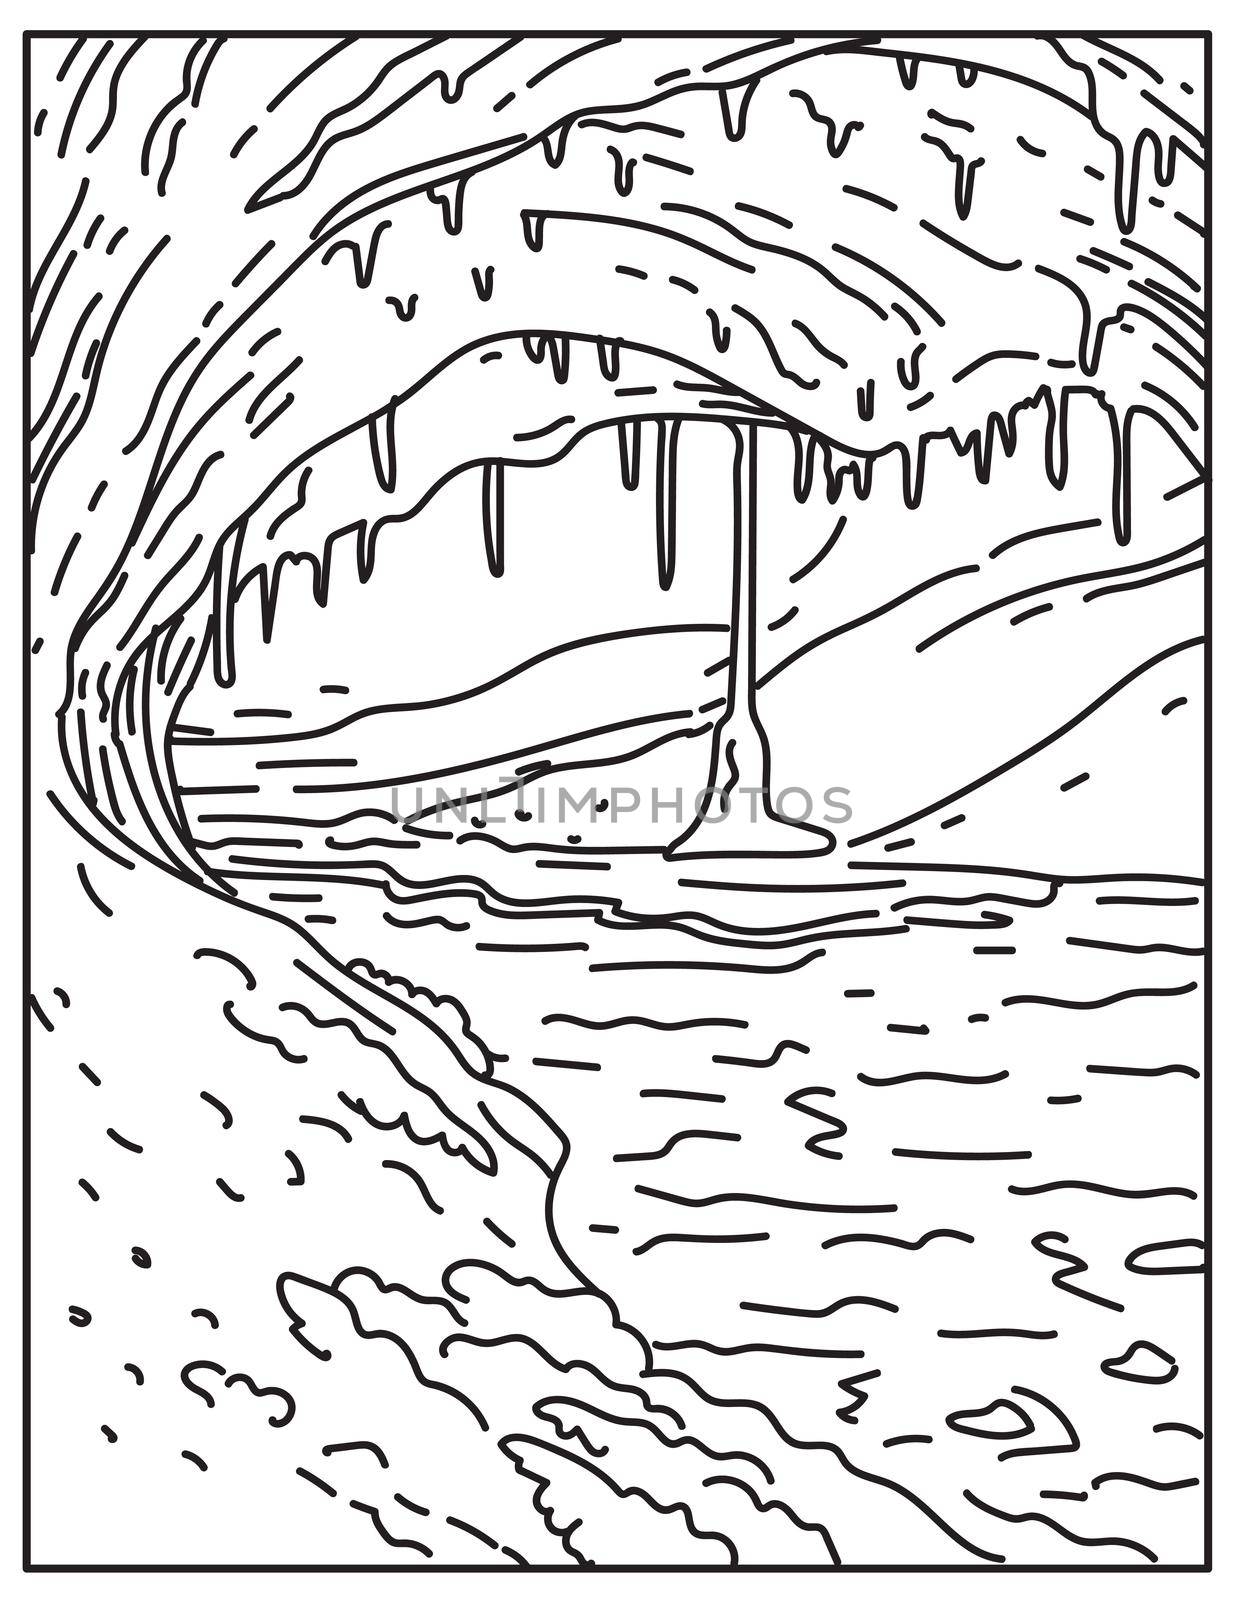 Wind Cave National Park Located in the Southwestern Corner of South Dakota United States Mono Line or Monoline Black and White Line Art by patrimonio